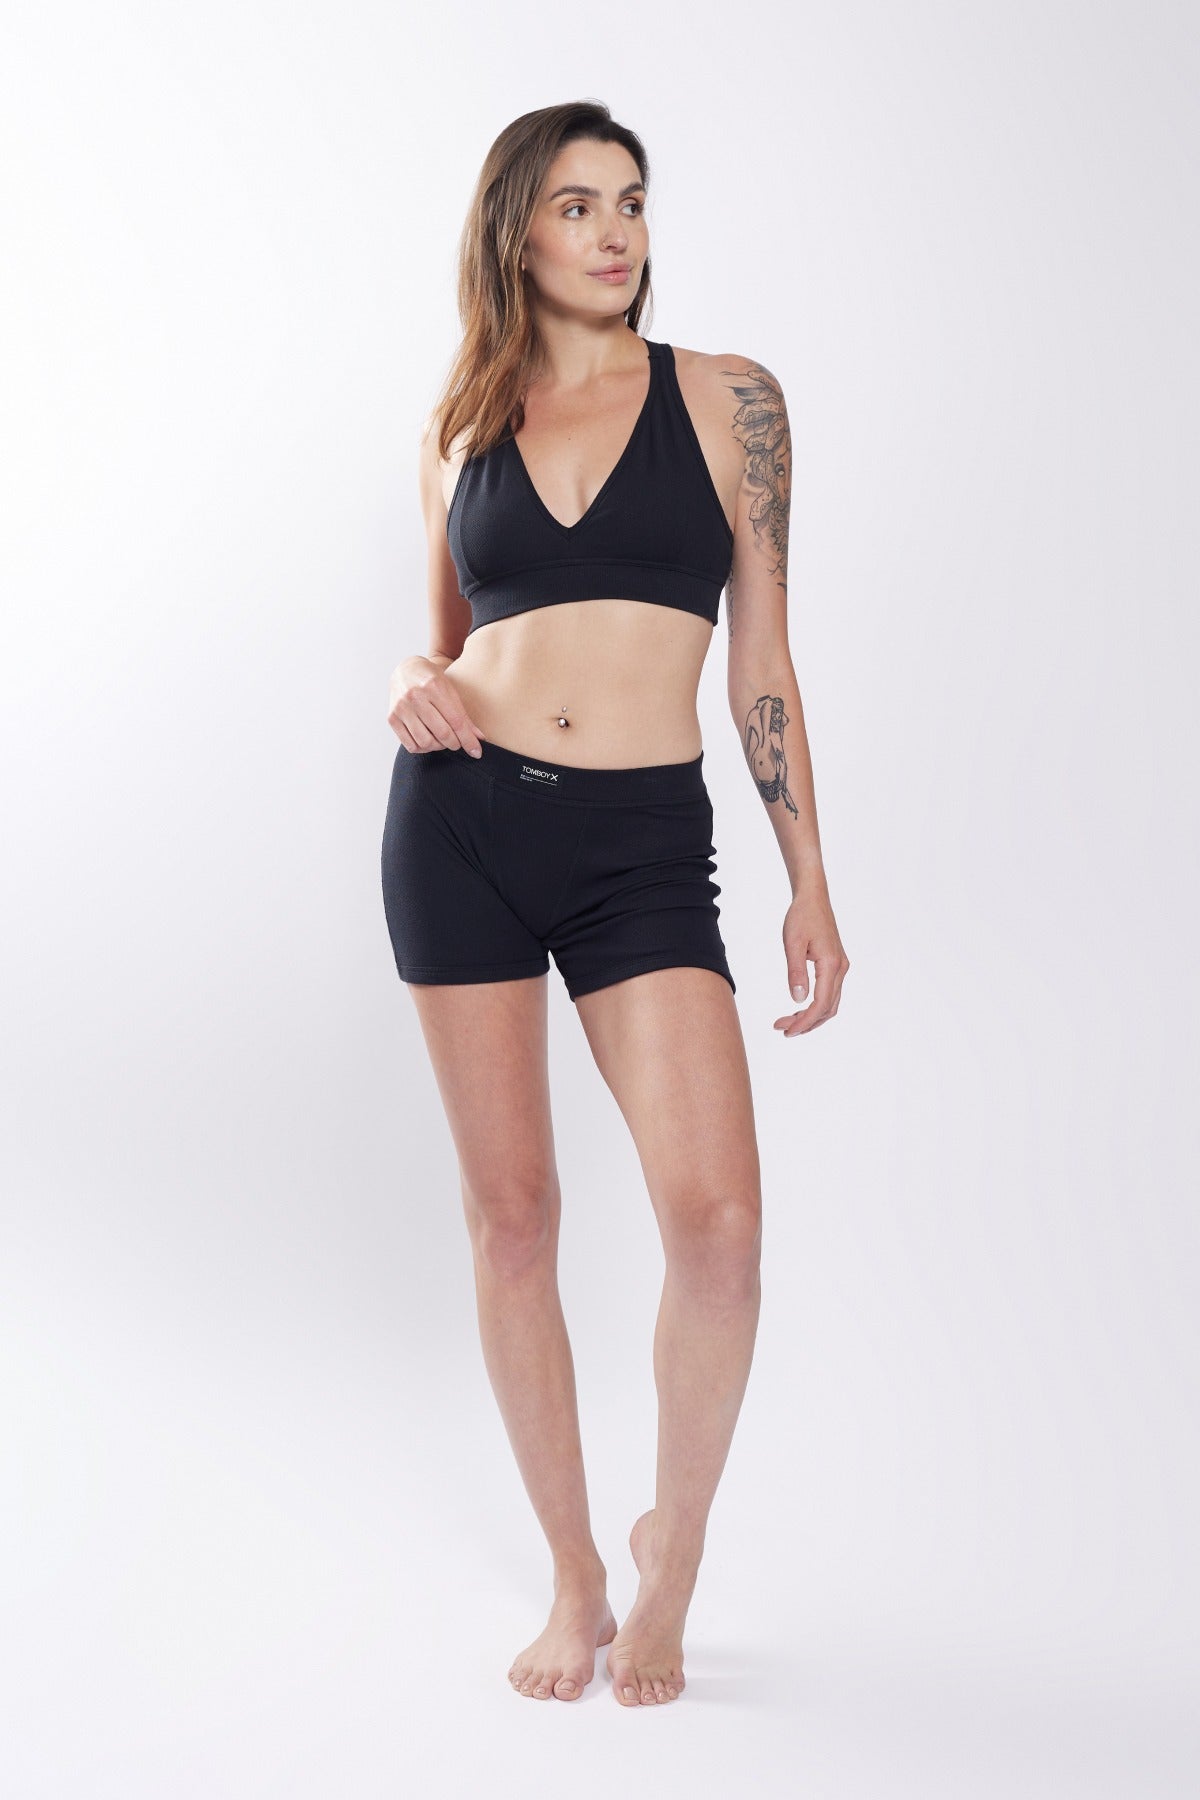 SKIMS on X: Perfect for stay-at-home lounging, the Cotton Sleep Bundle  featuring the Cotton Rib Tank and Cotton Rib Boxer is available now in 3  colors and in sizes XXS - 4X.